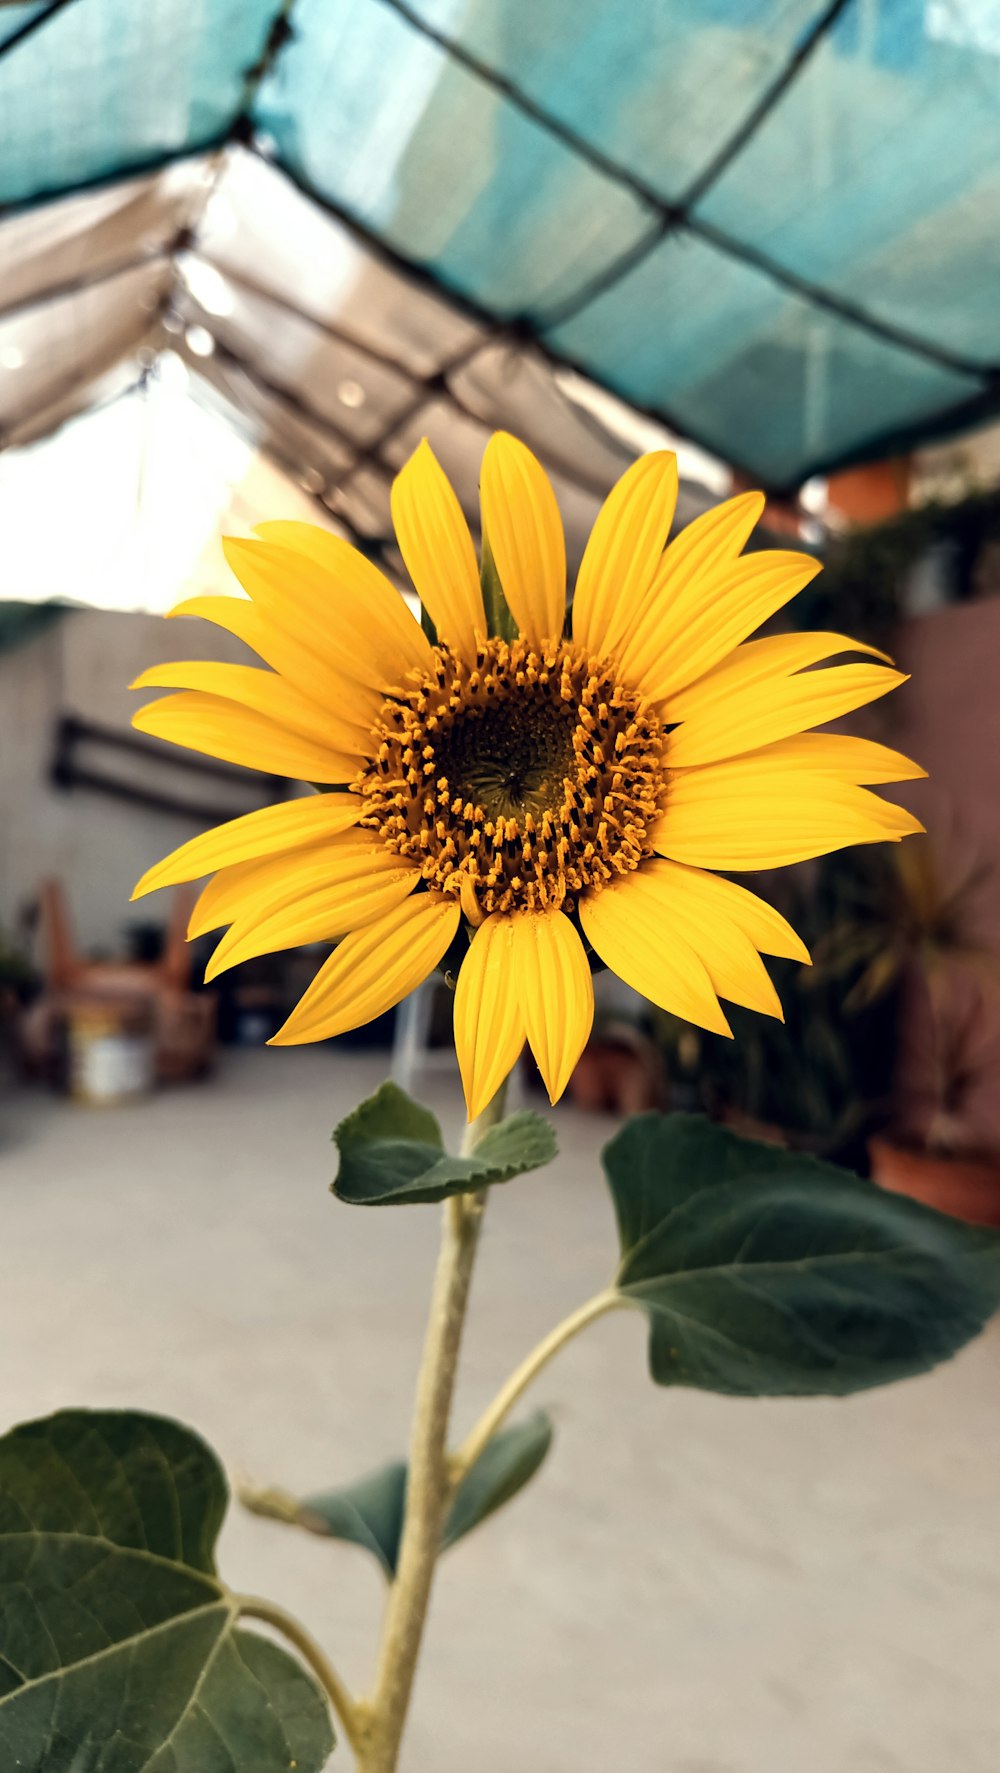 a large yellow sunflower in a greenhouse